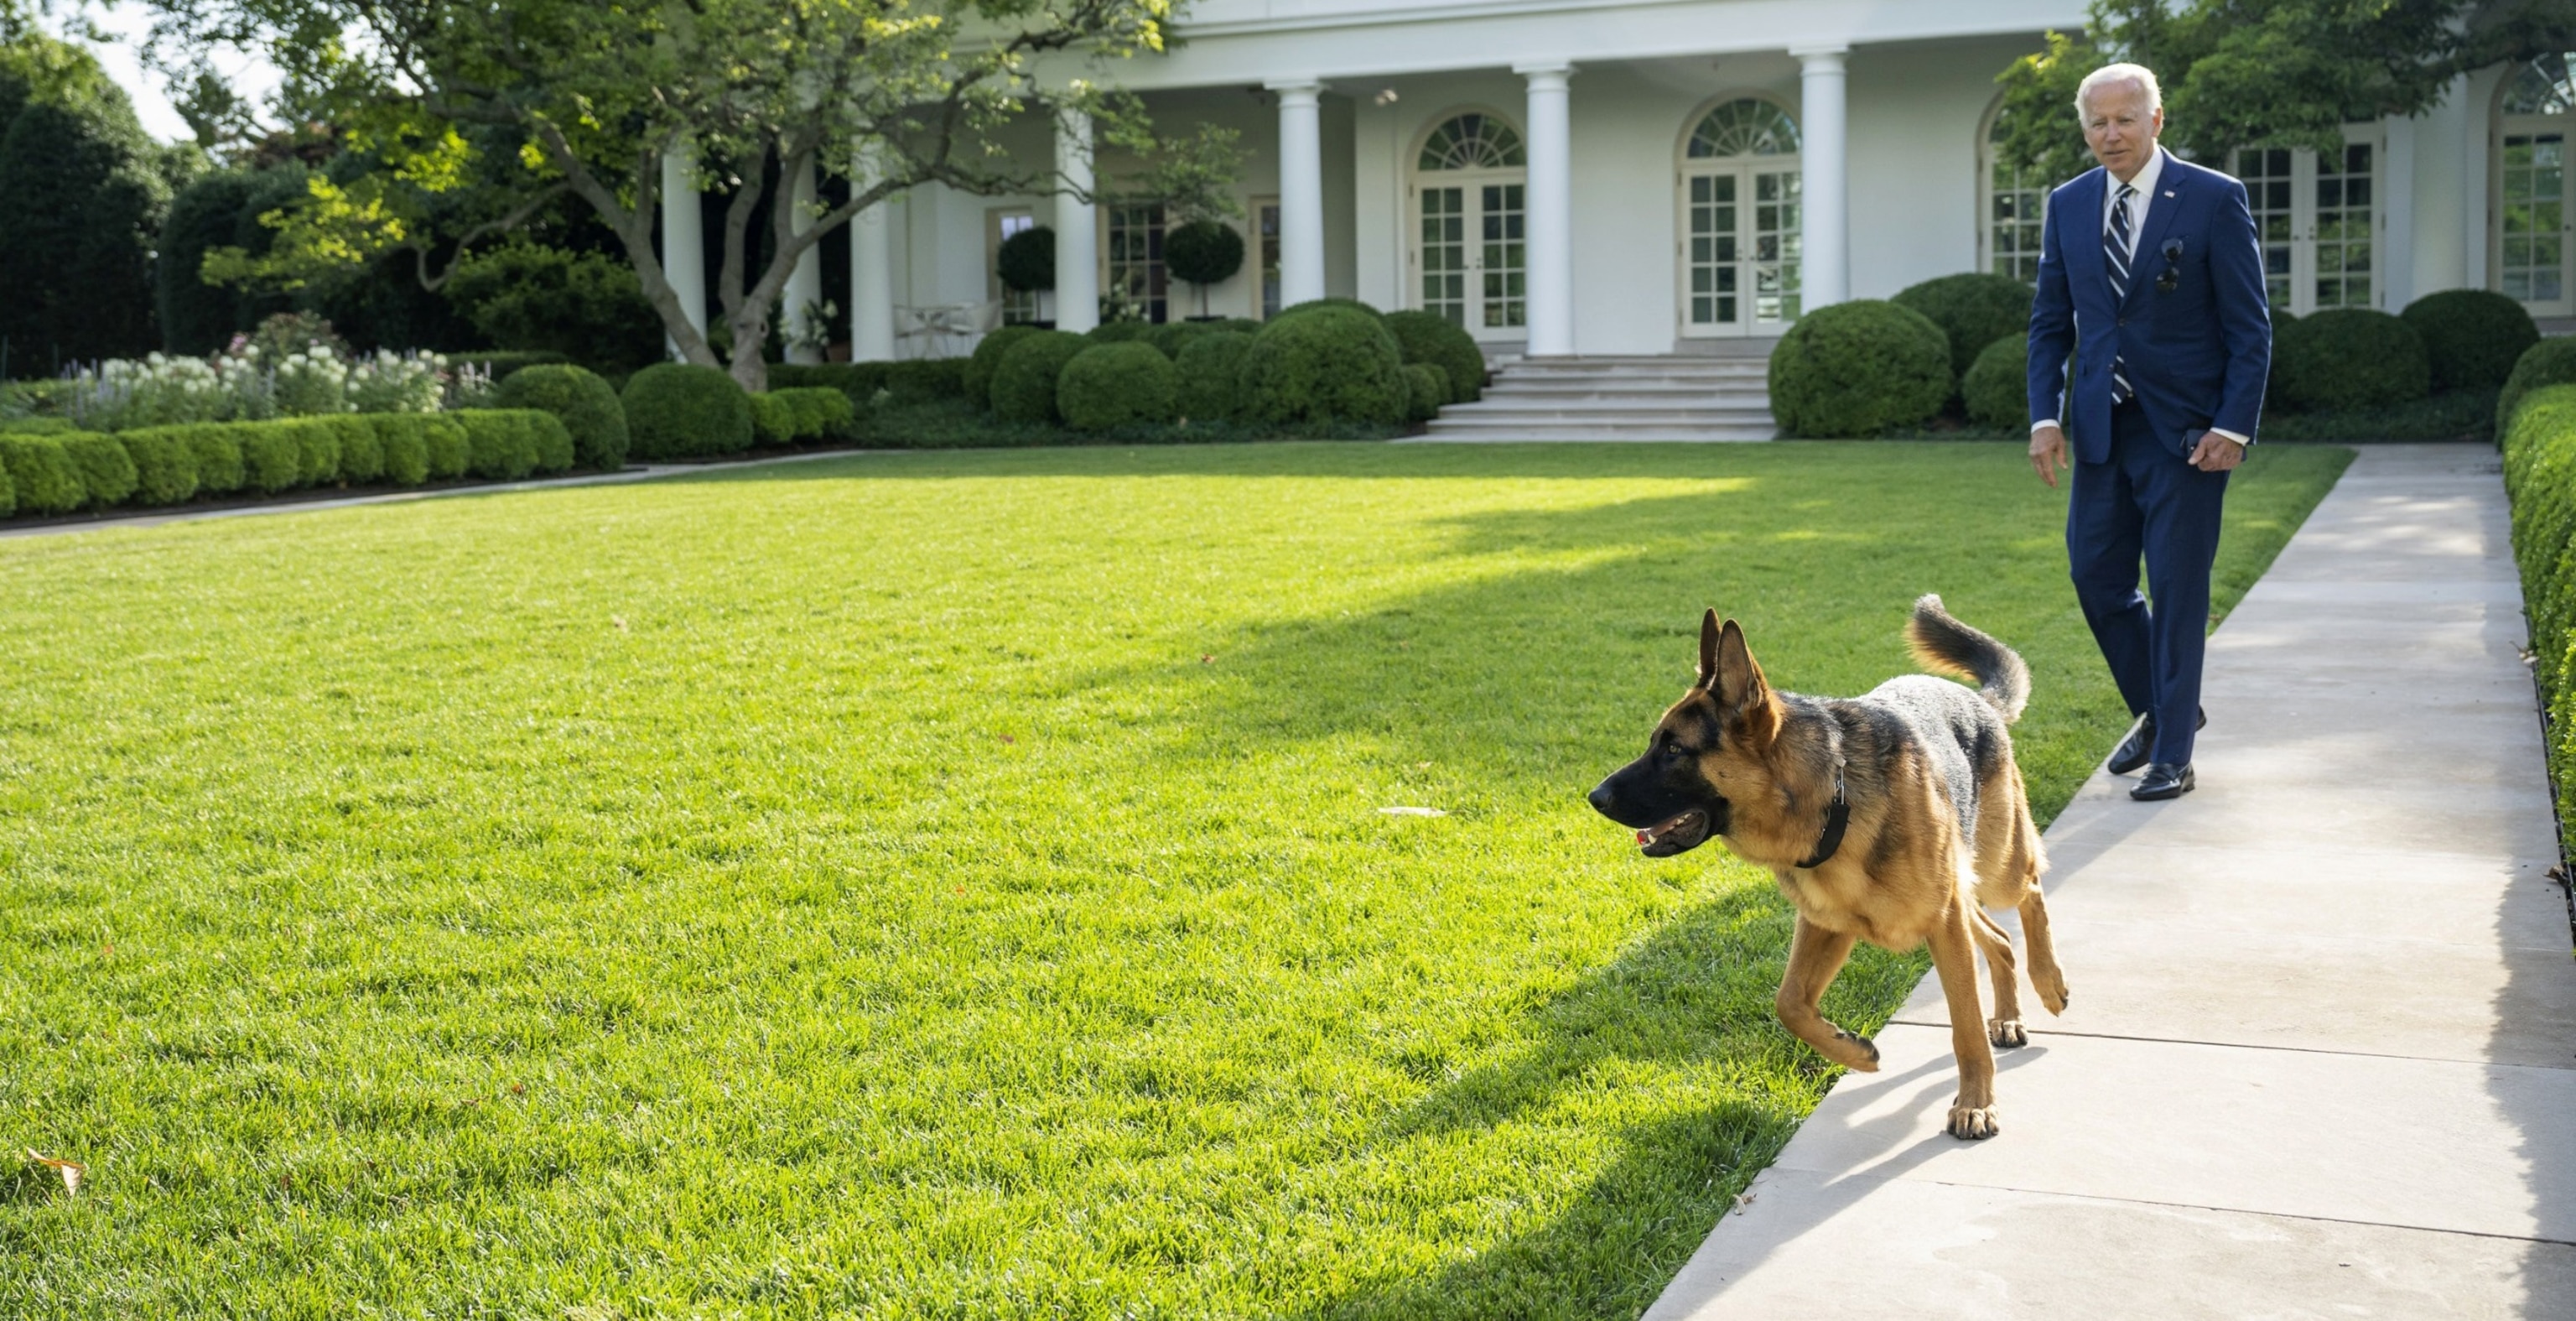 PHOTO: In this June 21, 2022, file photo, President Joe Biden walks with his dog Commander, in the Rose Garden of the White House, in Washington, D.C.